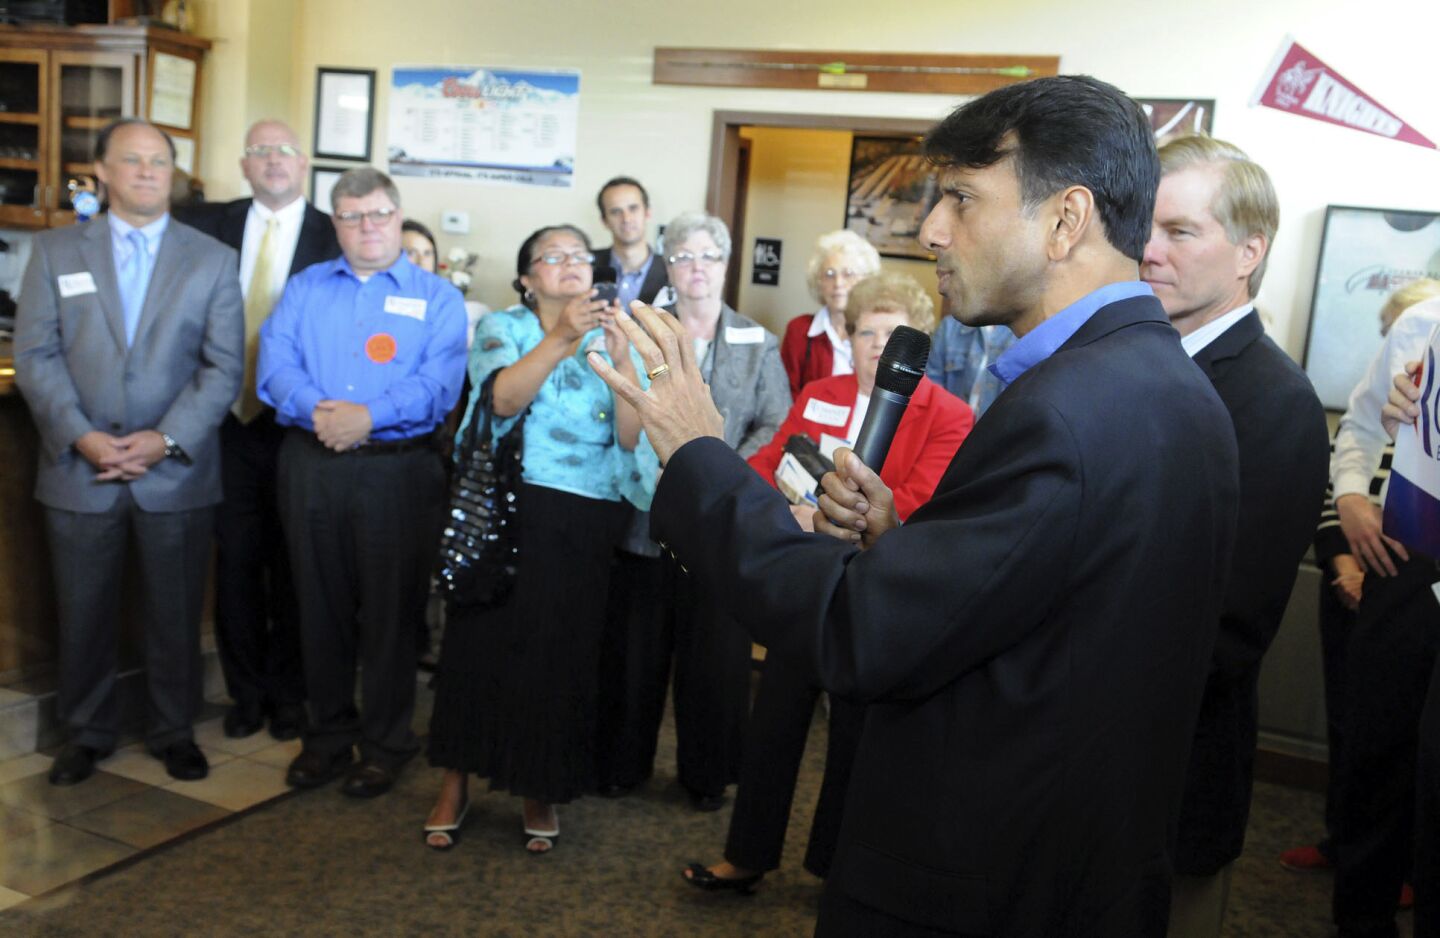 Gov. Bobby Jindal of Louisiana has earned a reputation as a policy expert within the Republican Party, particularly on healthcare, though his first chance at the national stage, the 2009 Republican response to Obama's State of the Union address, was ineffectual and poorly reviewed.